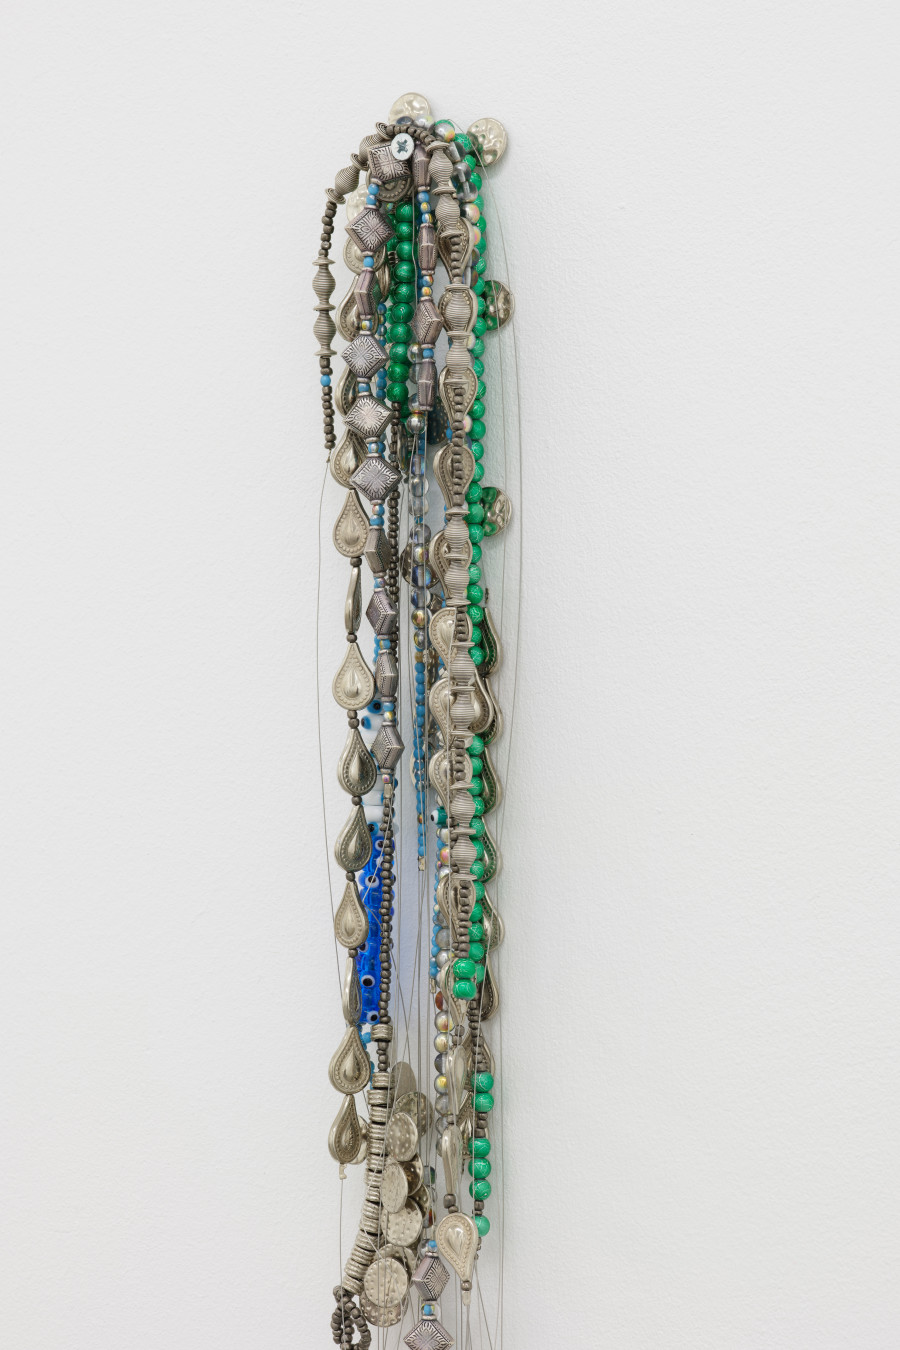 Detail, Untitled, 2022, wire and glass beads, dimensions variable